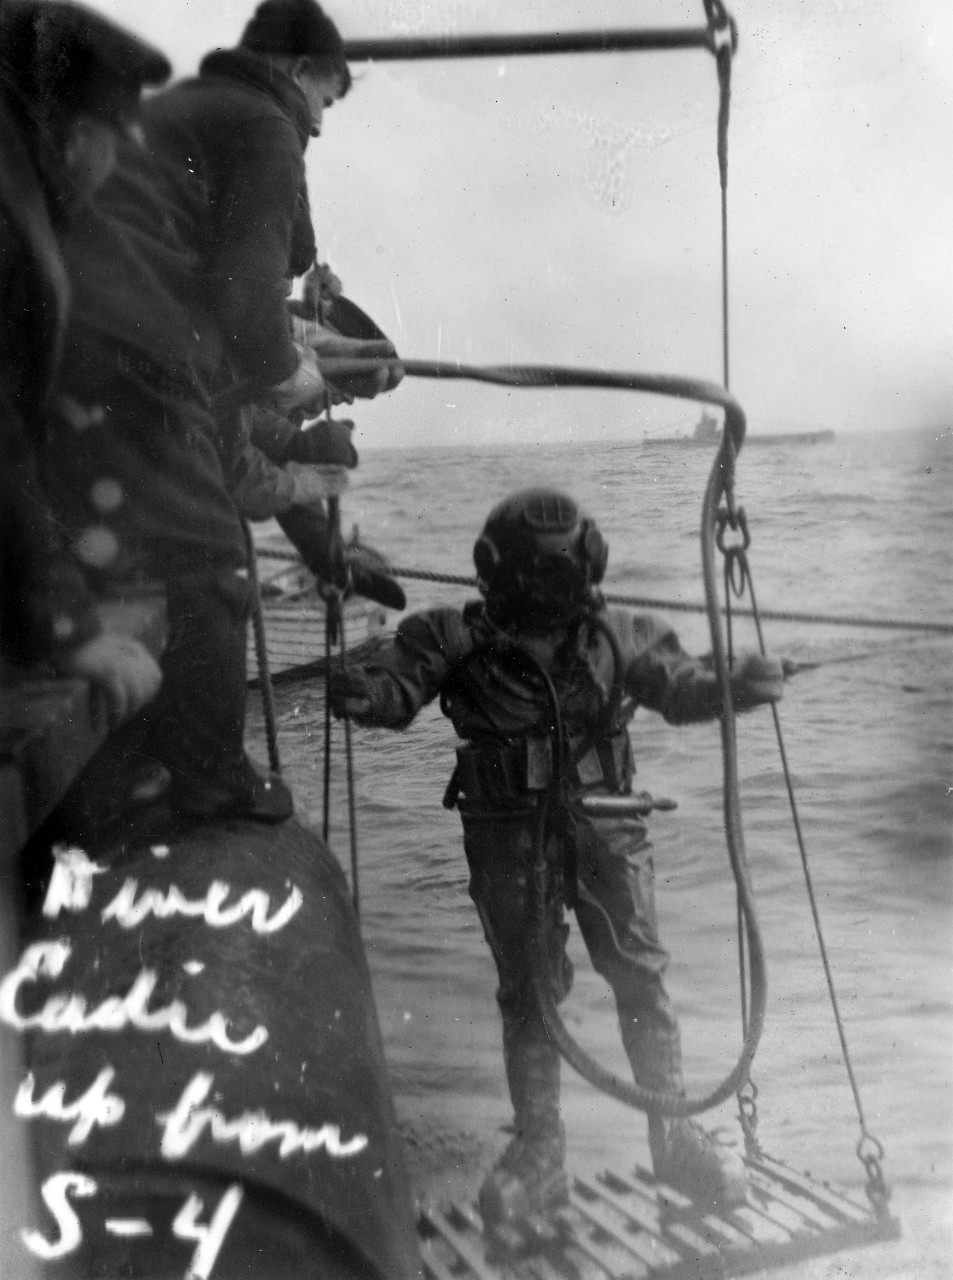 Diver Eadie, received the Medal of Honor for saving the life of a trapped diver during the 1928 salvage of USS S-4.